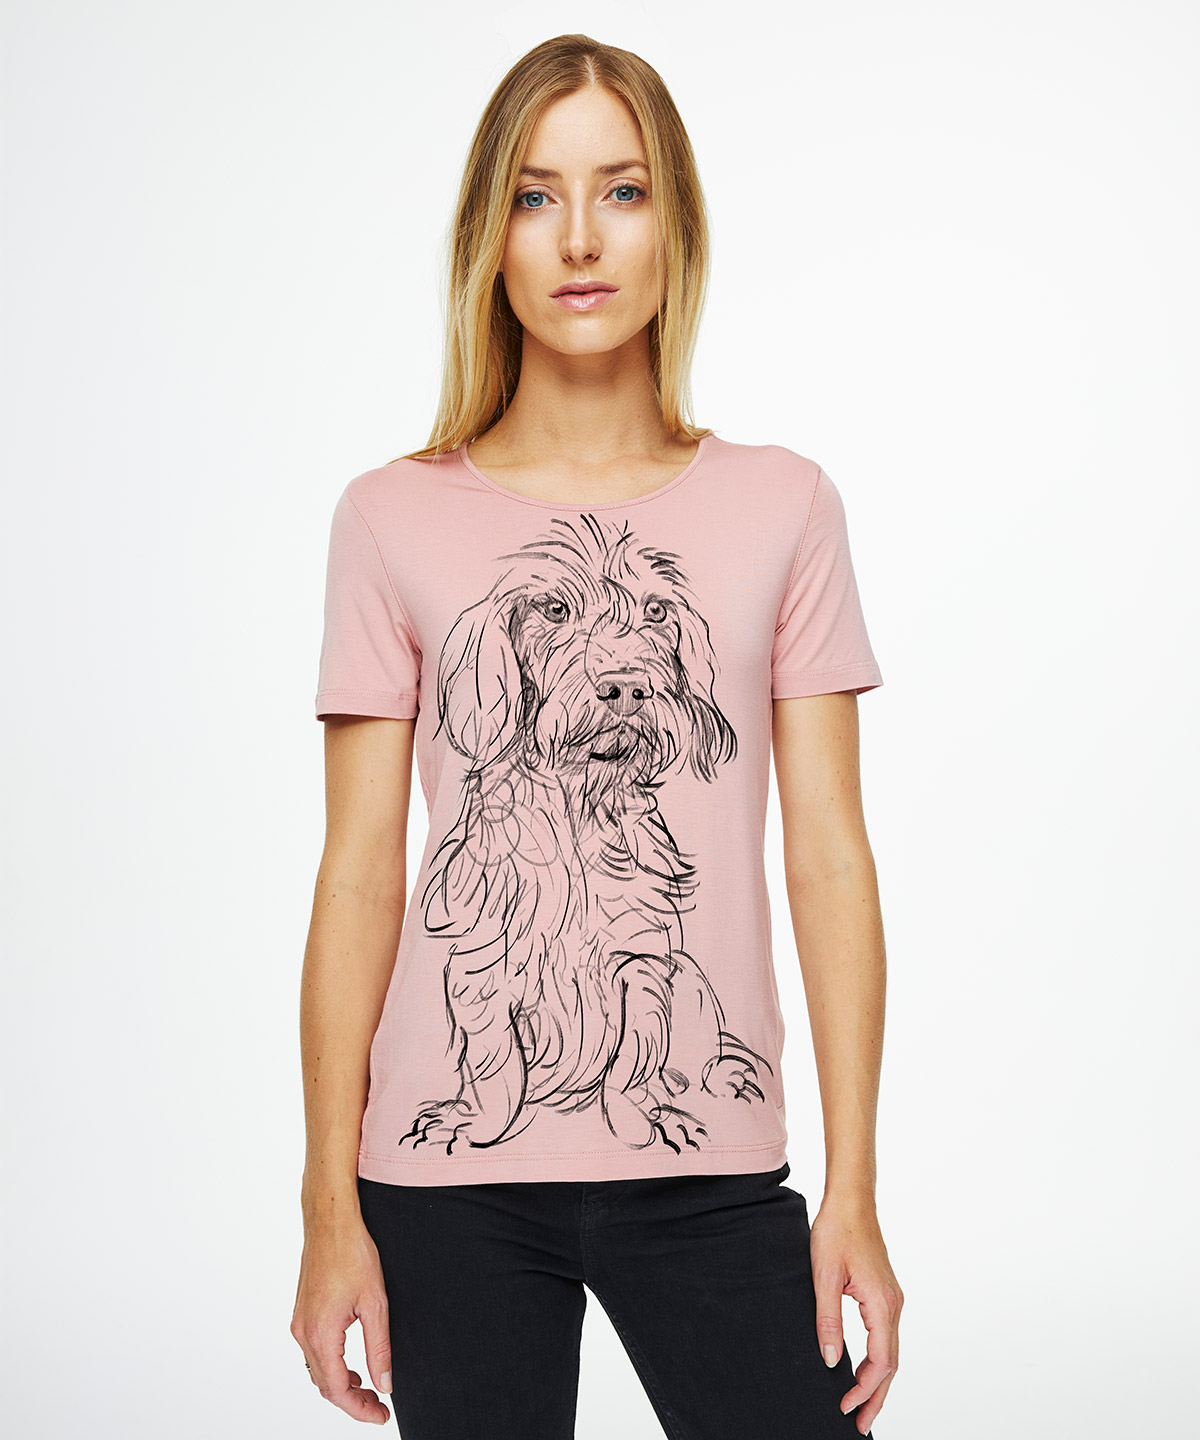 Wirehaired_Dachshund light pink t-shirt woman